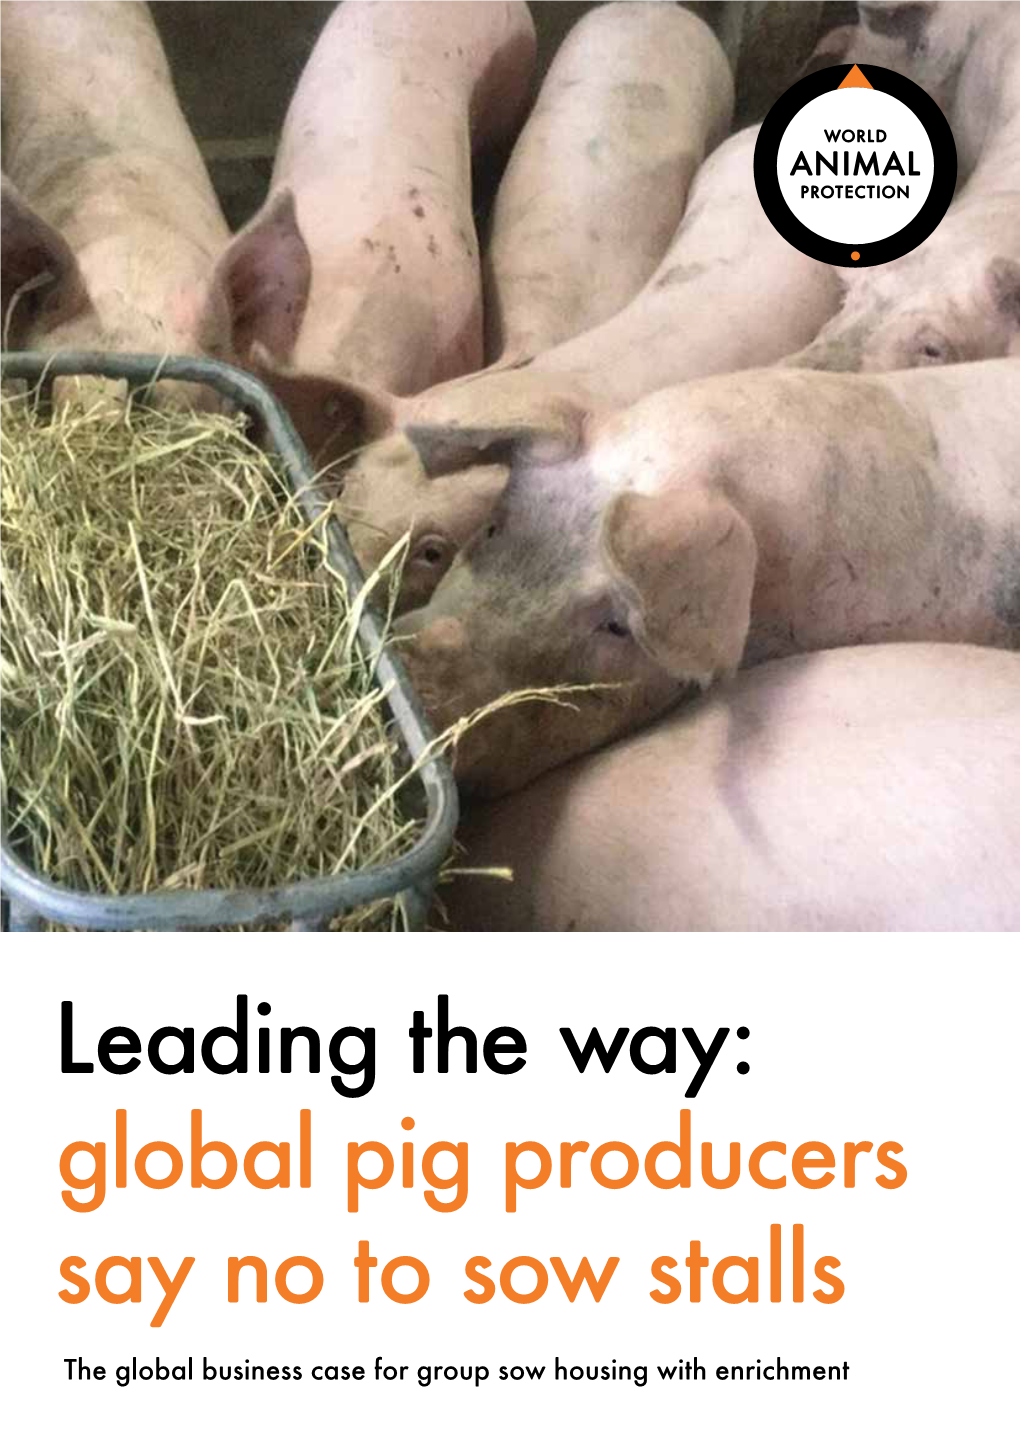 Global Pig Producers Say No to Sow Stalls the Global Business Case for Group Sow Housing with Enrichment